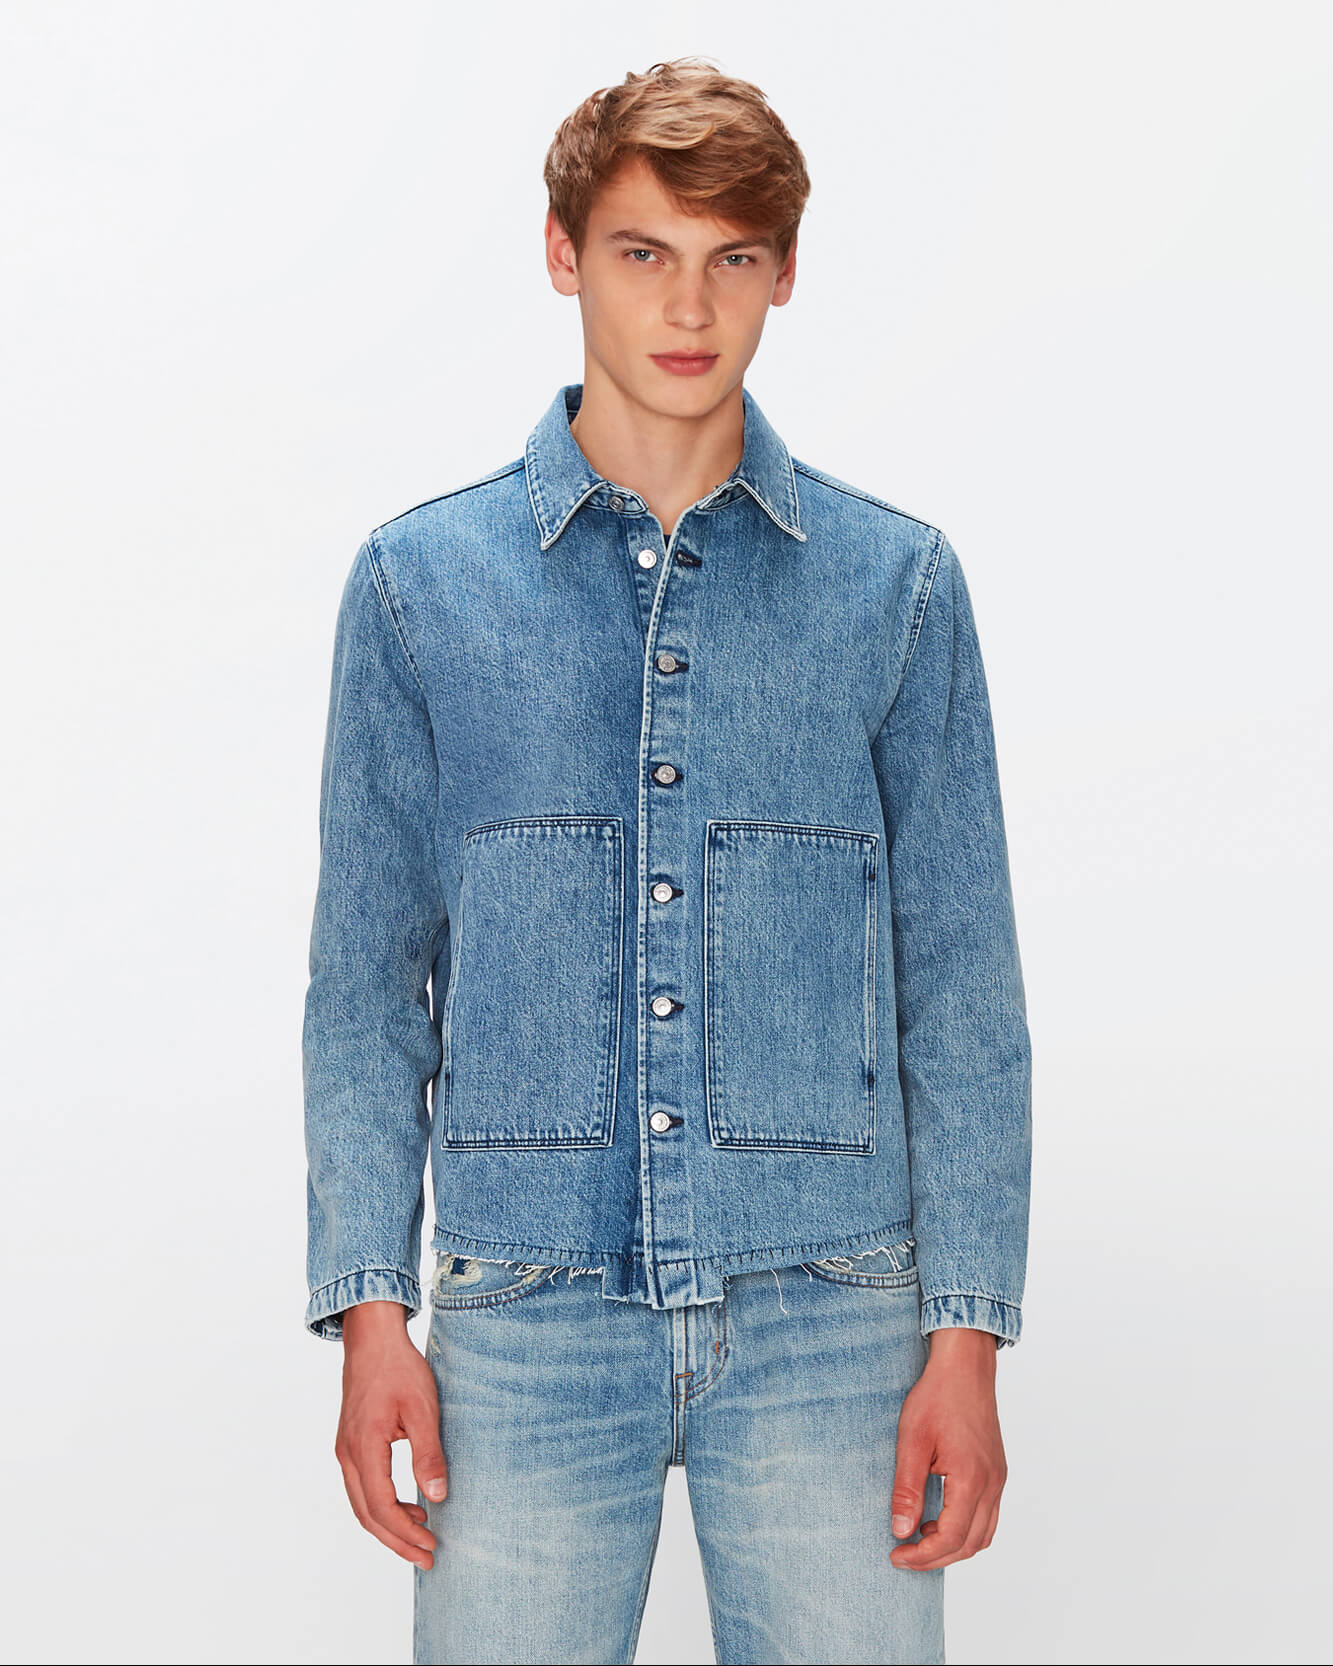 Workwear Overshirt in Vintage Blue | 7 For All Mankind